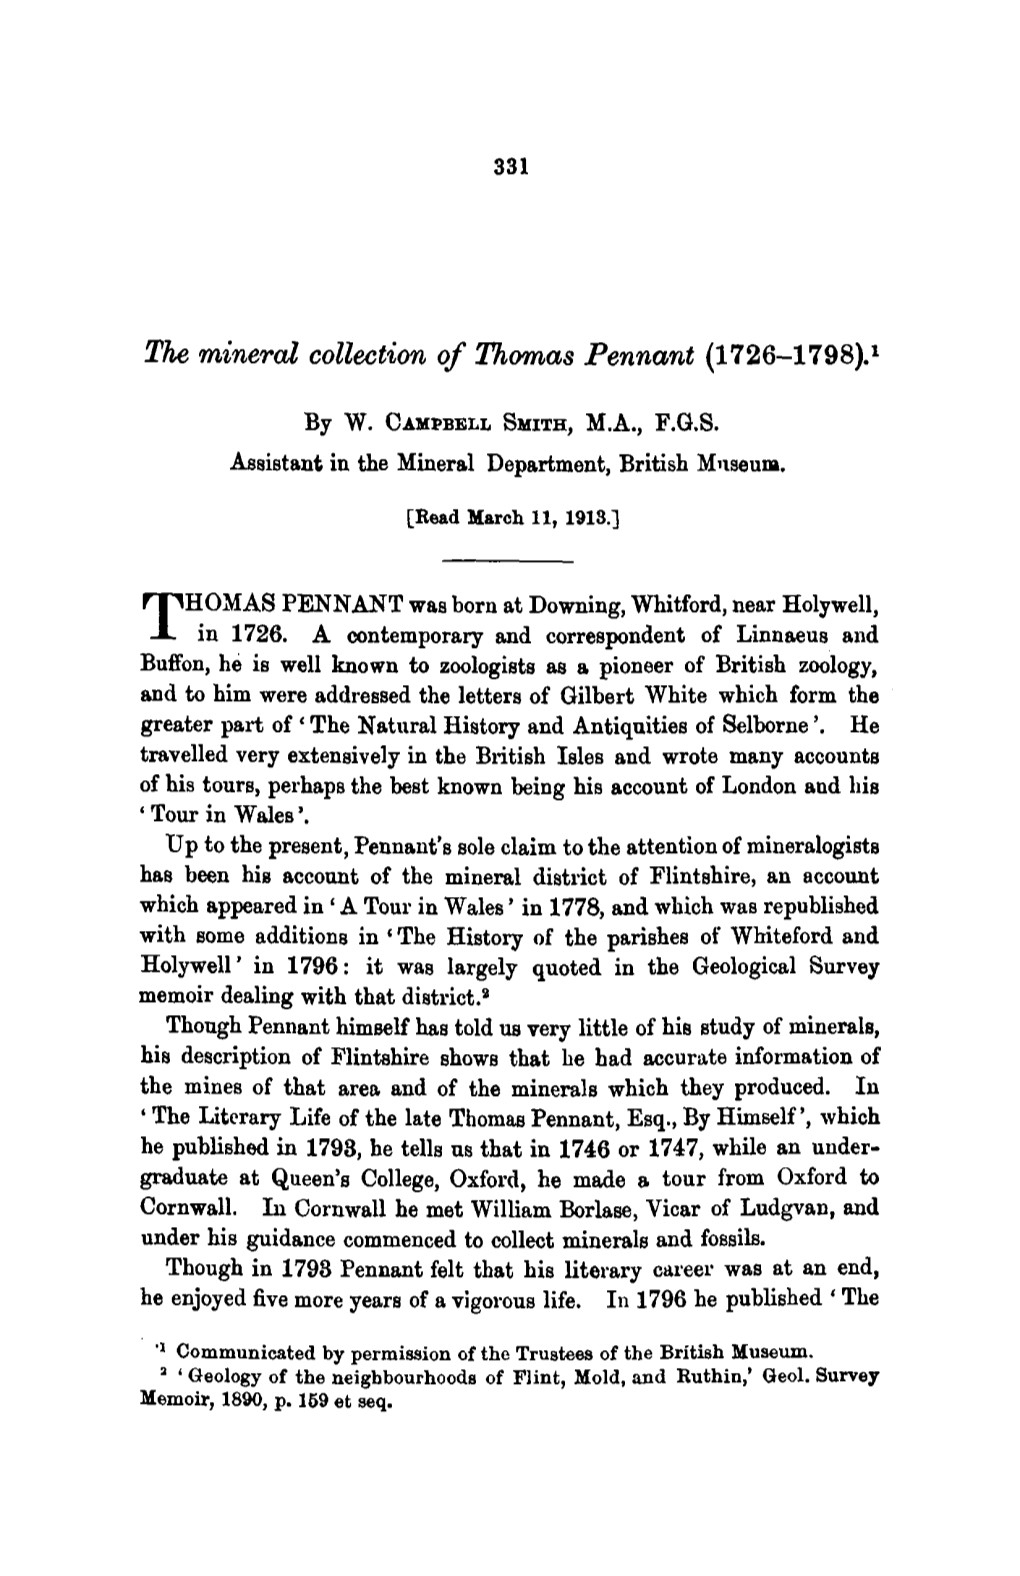 The Mineral Collection of Thomas Pennant (1726-1798)